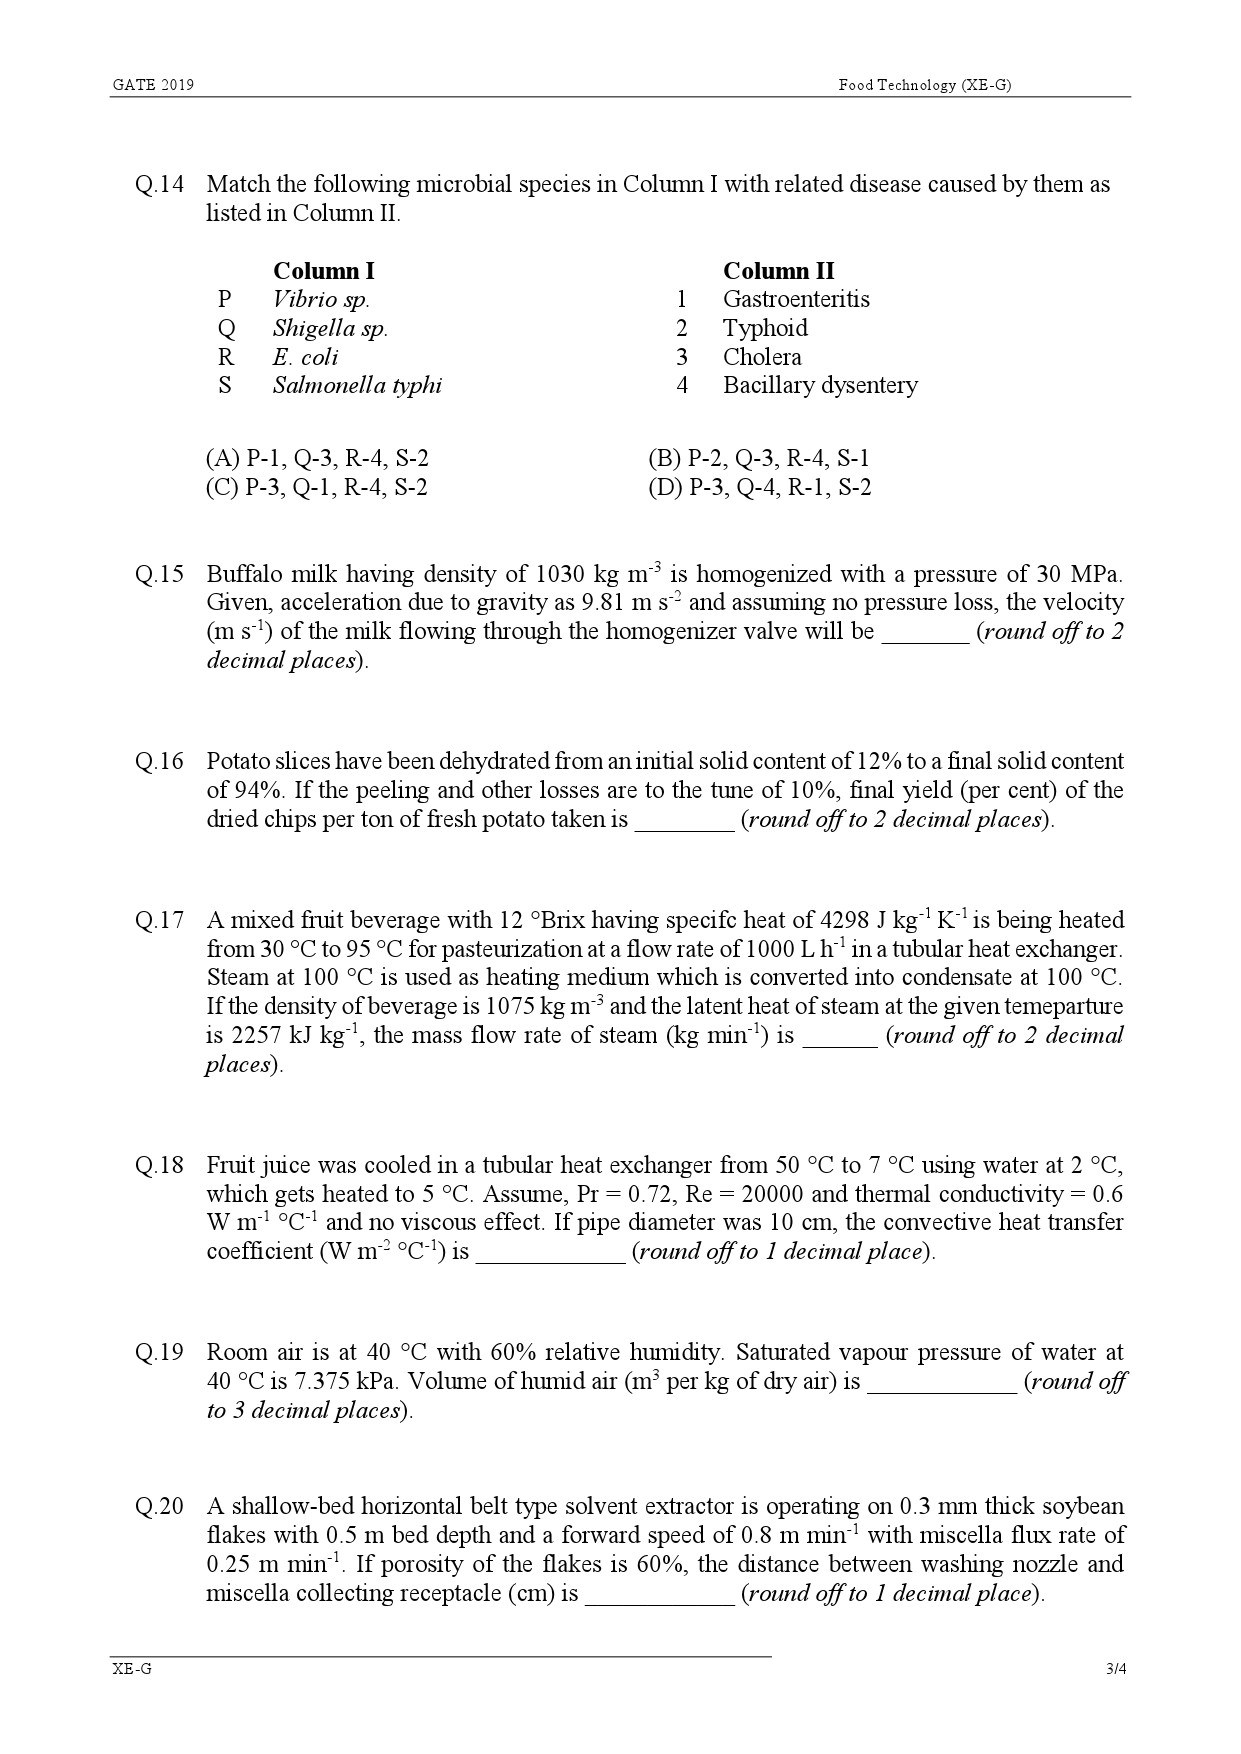 GATE Exam Question Paper 2019 Engineering Sciences 34